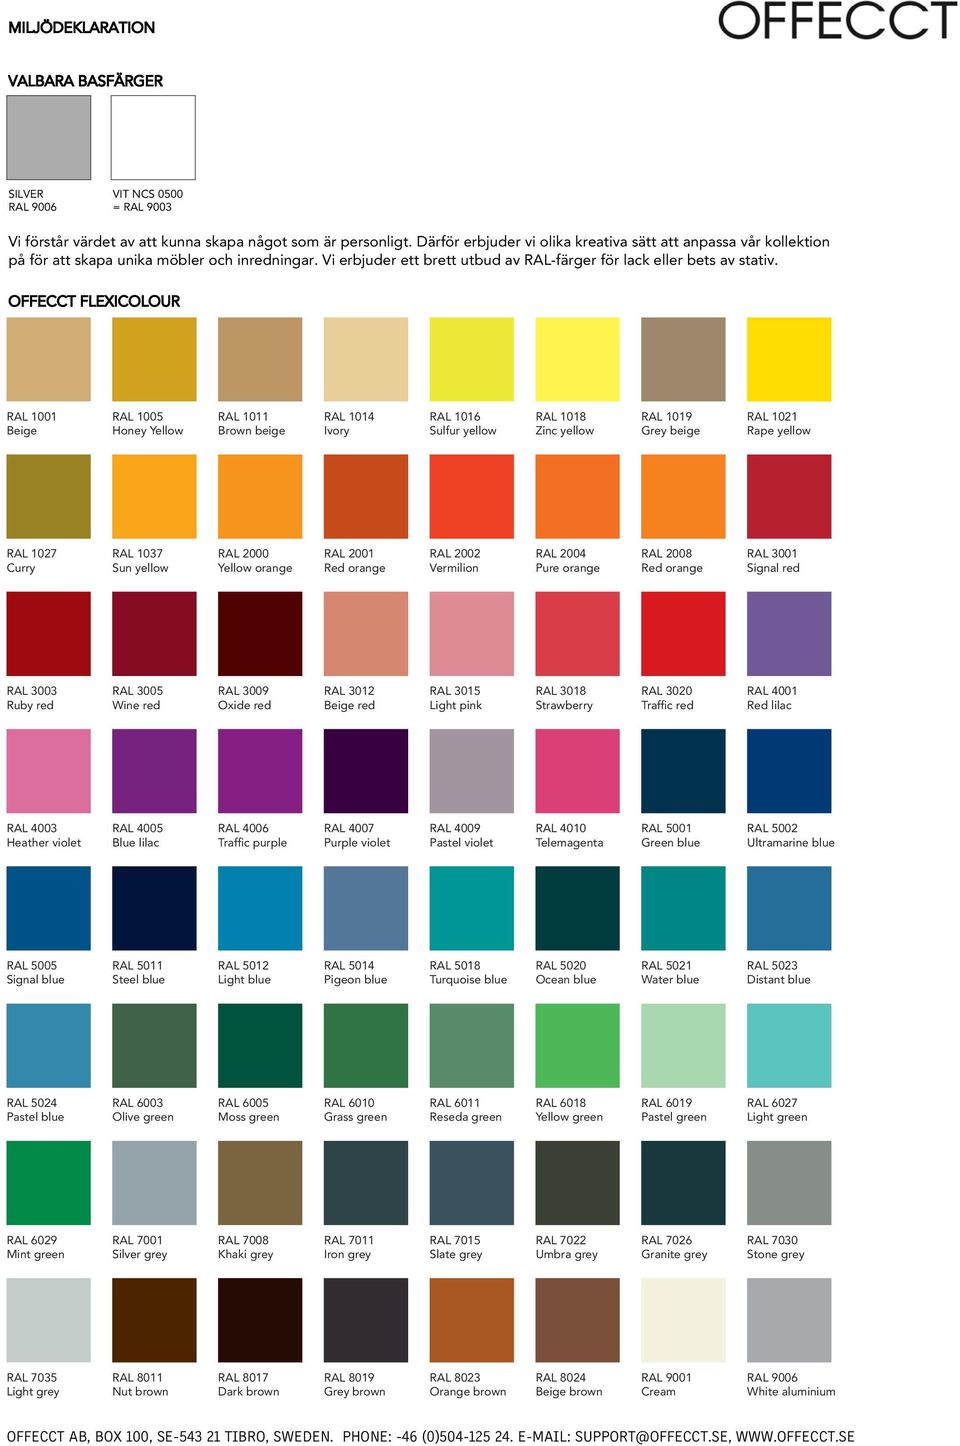 OFFECCT FLEXICOLOUR RAL 1001 Beige RAL 1005 Honey Yellow RAL 1011 Brown beige RAL 1014 Ivory RAL 1016 Sulfur yellow RAL 1018 Zinc yellow RAL 1019 Grey beige RAL 1021 Rape yellow RAL 1027 Curry RAL